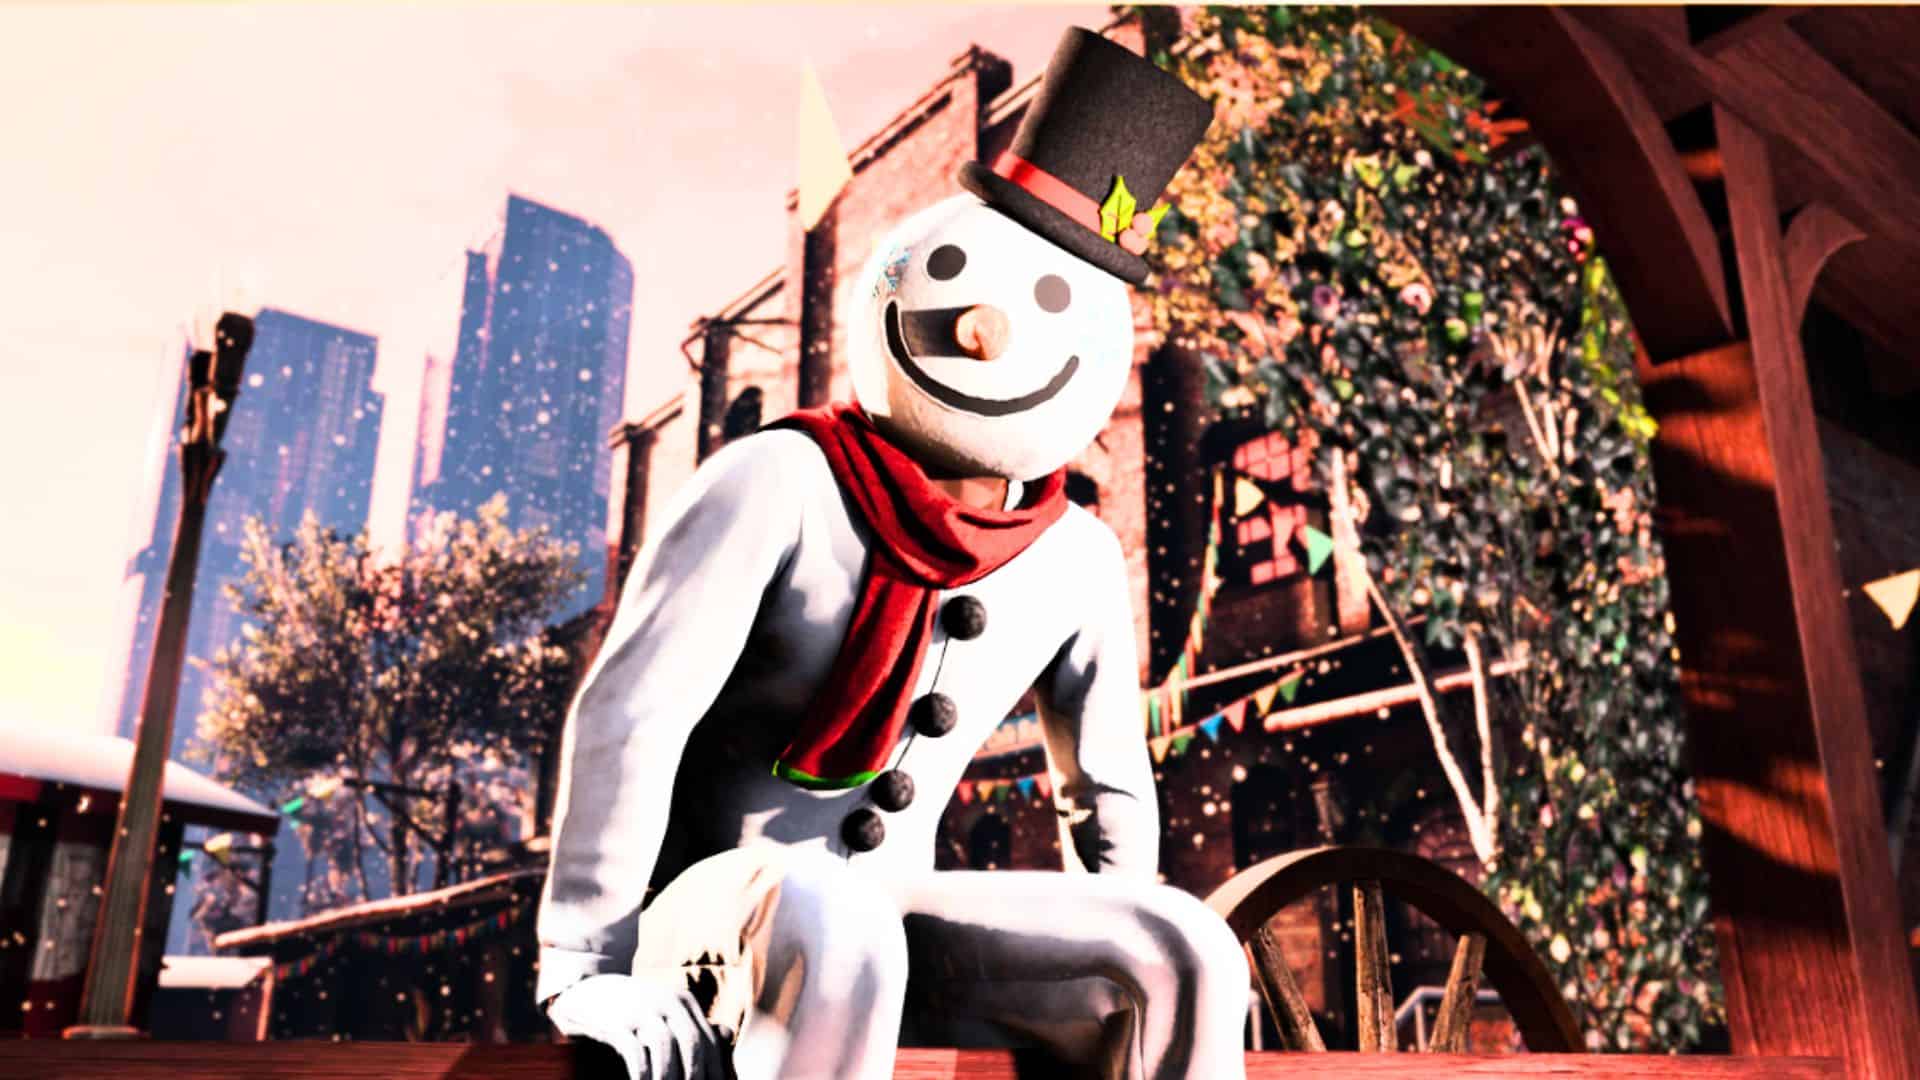 GTA Online: How to find all 25 snowman locations 2023 to get outfit and money